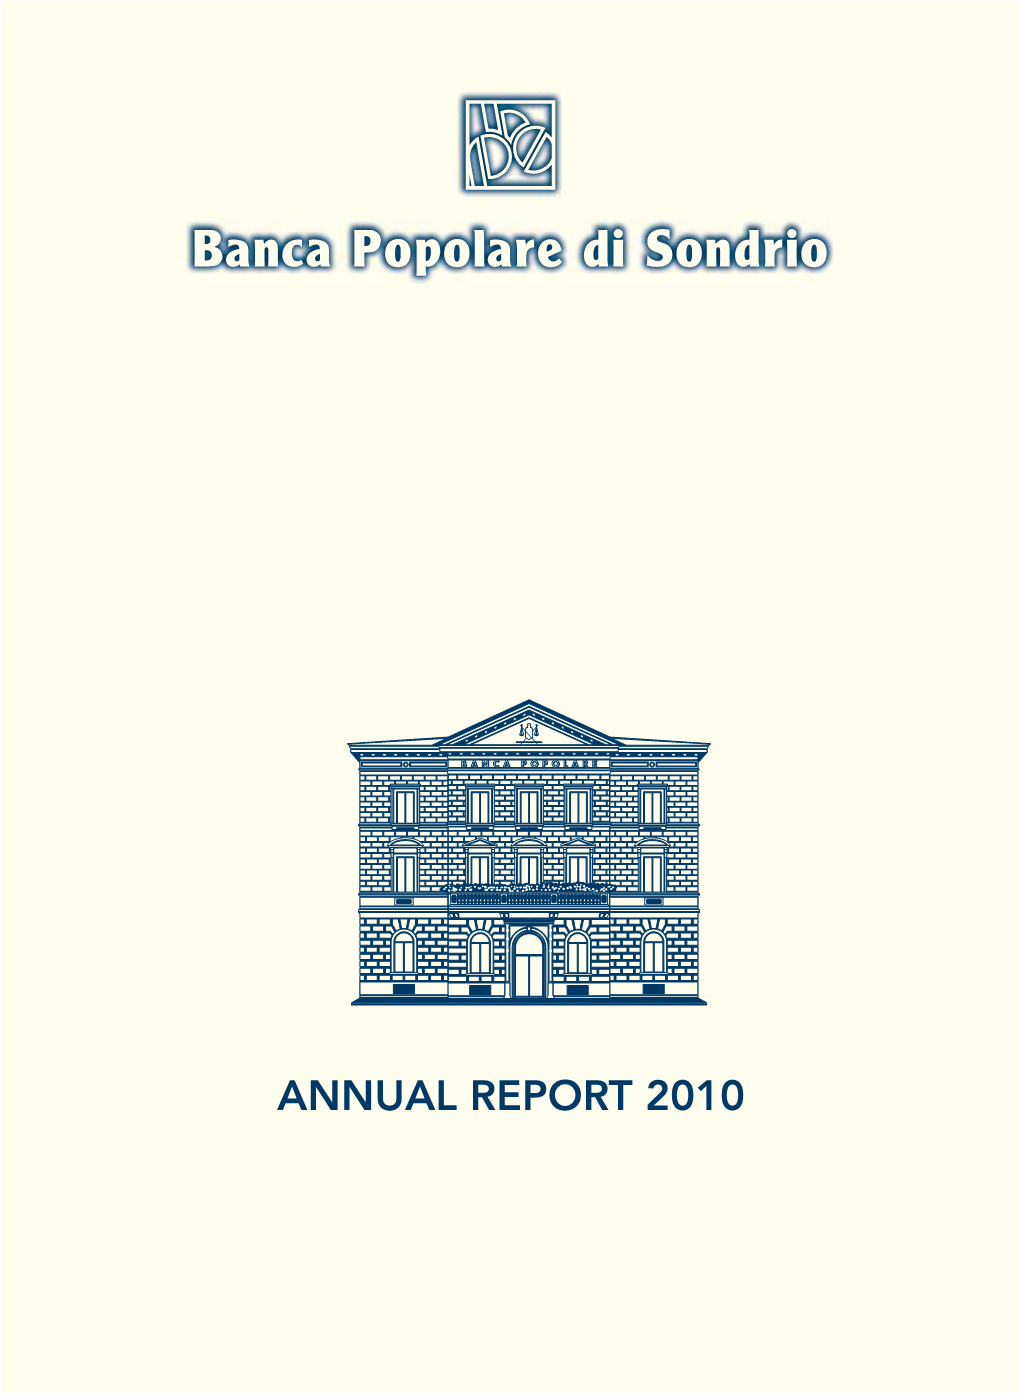 Annual Report 2010 Players of the Twentieth Century Art World in Italy